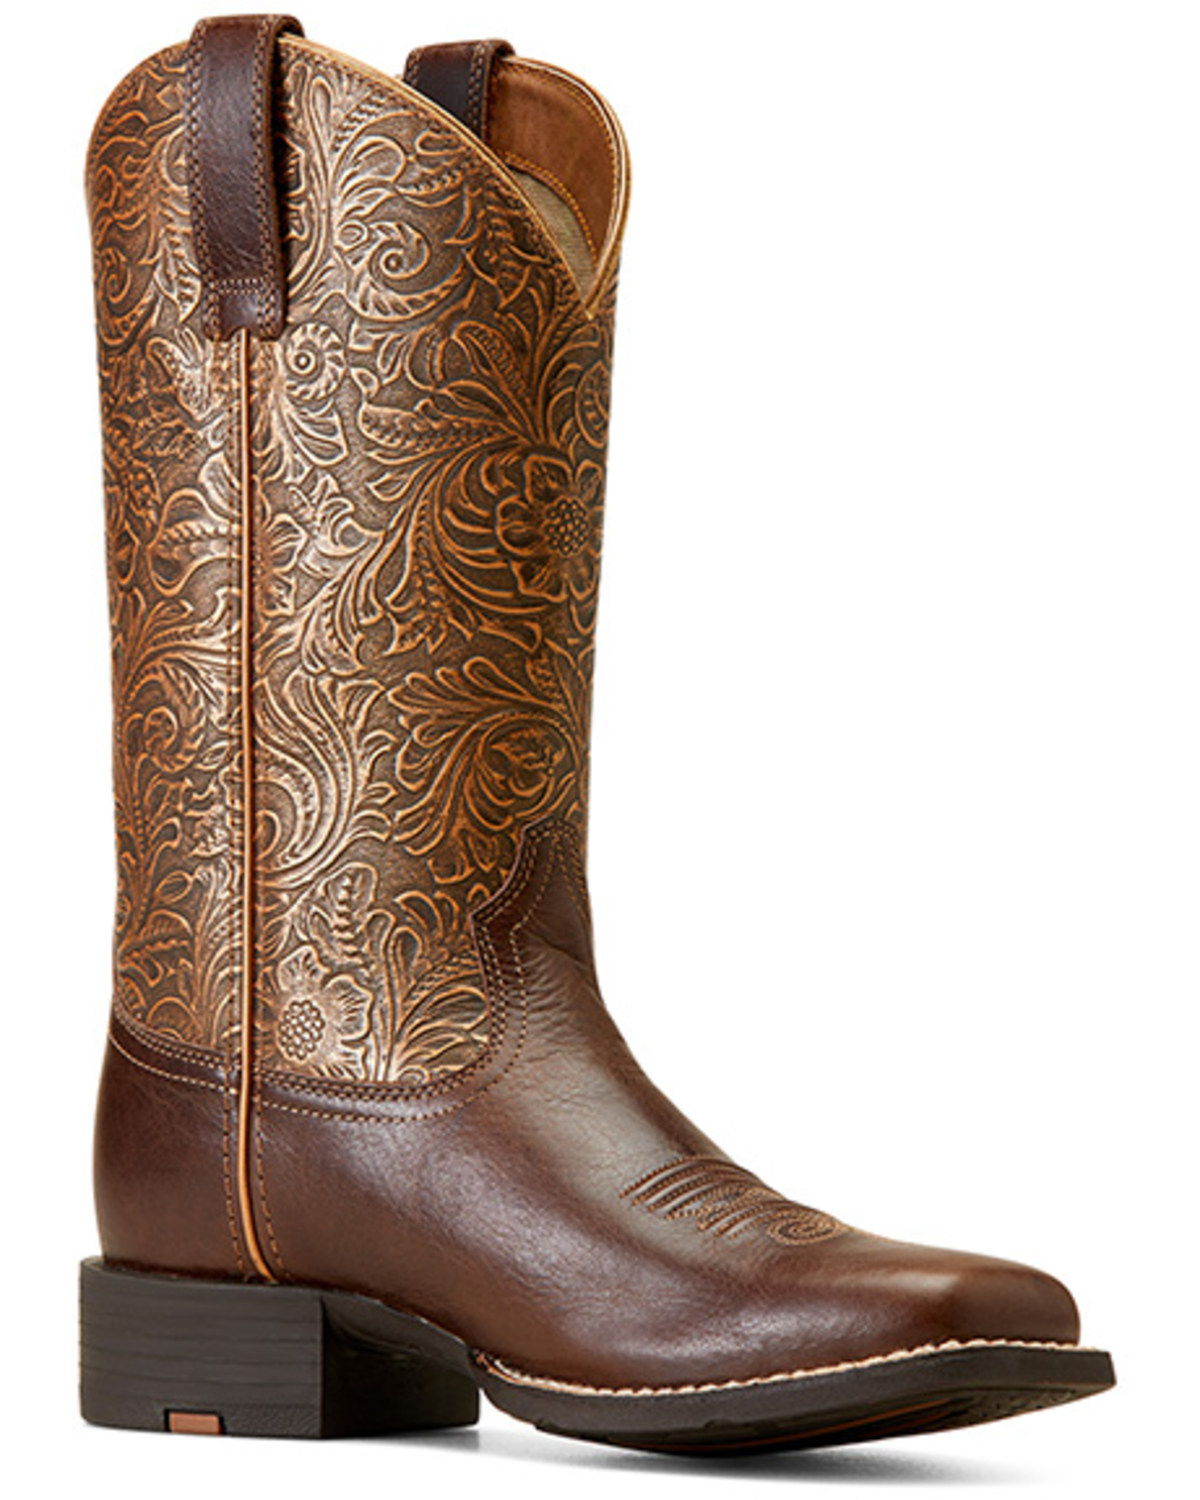 Ariat Women's Round Up Performance Western Boots - Broad Square Toe